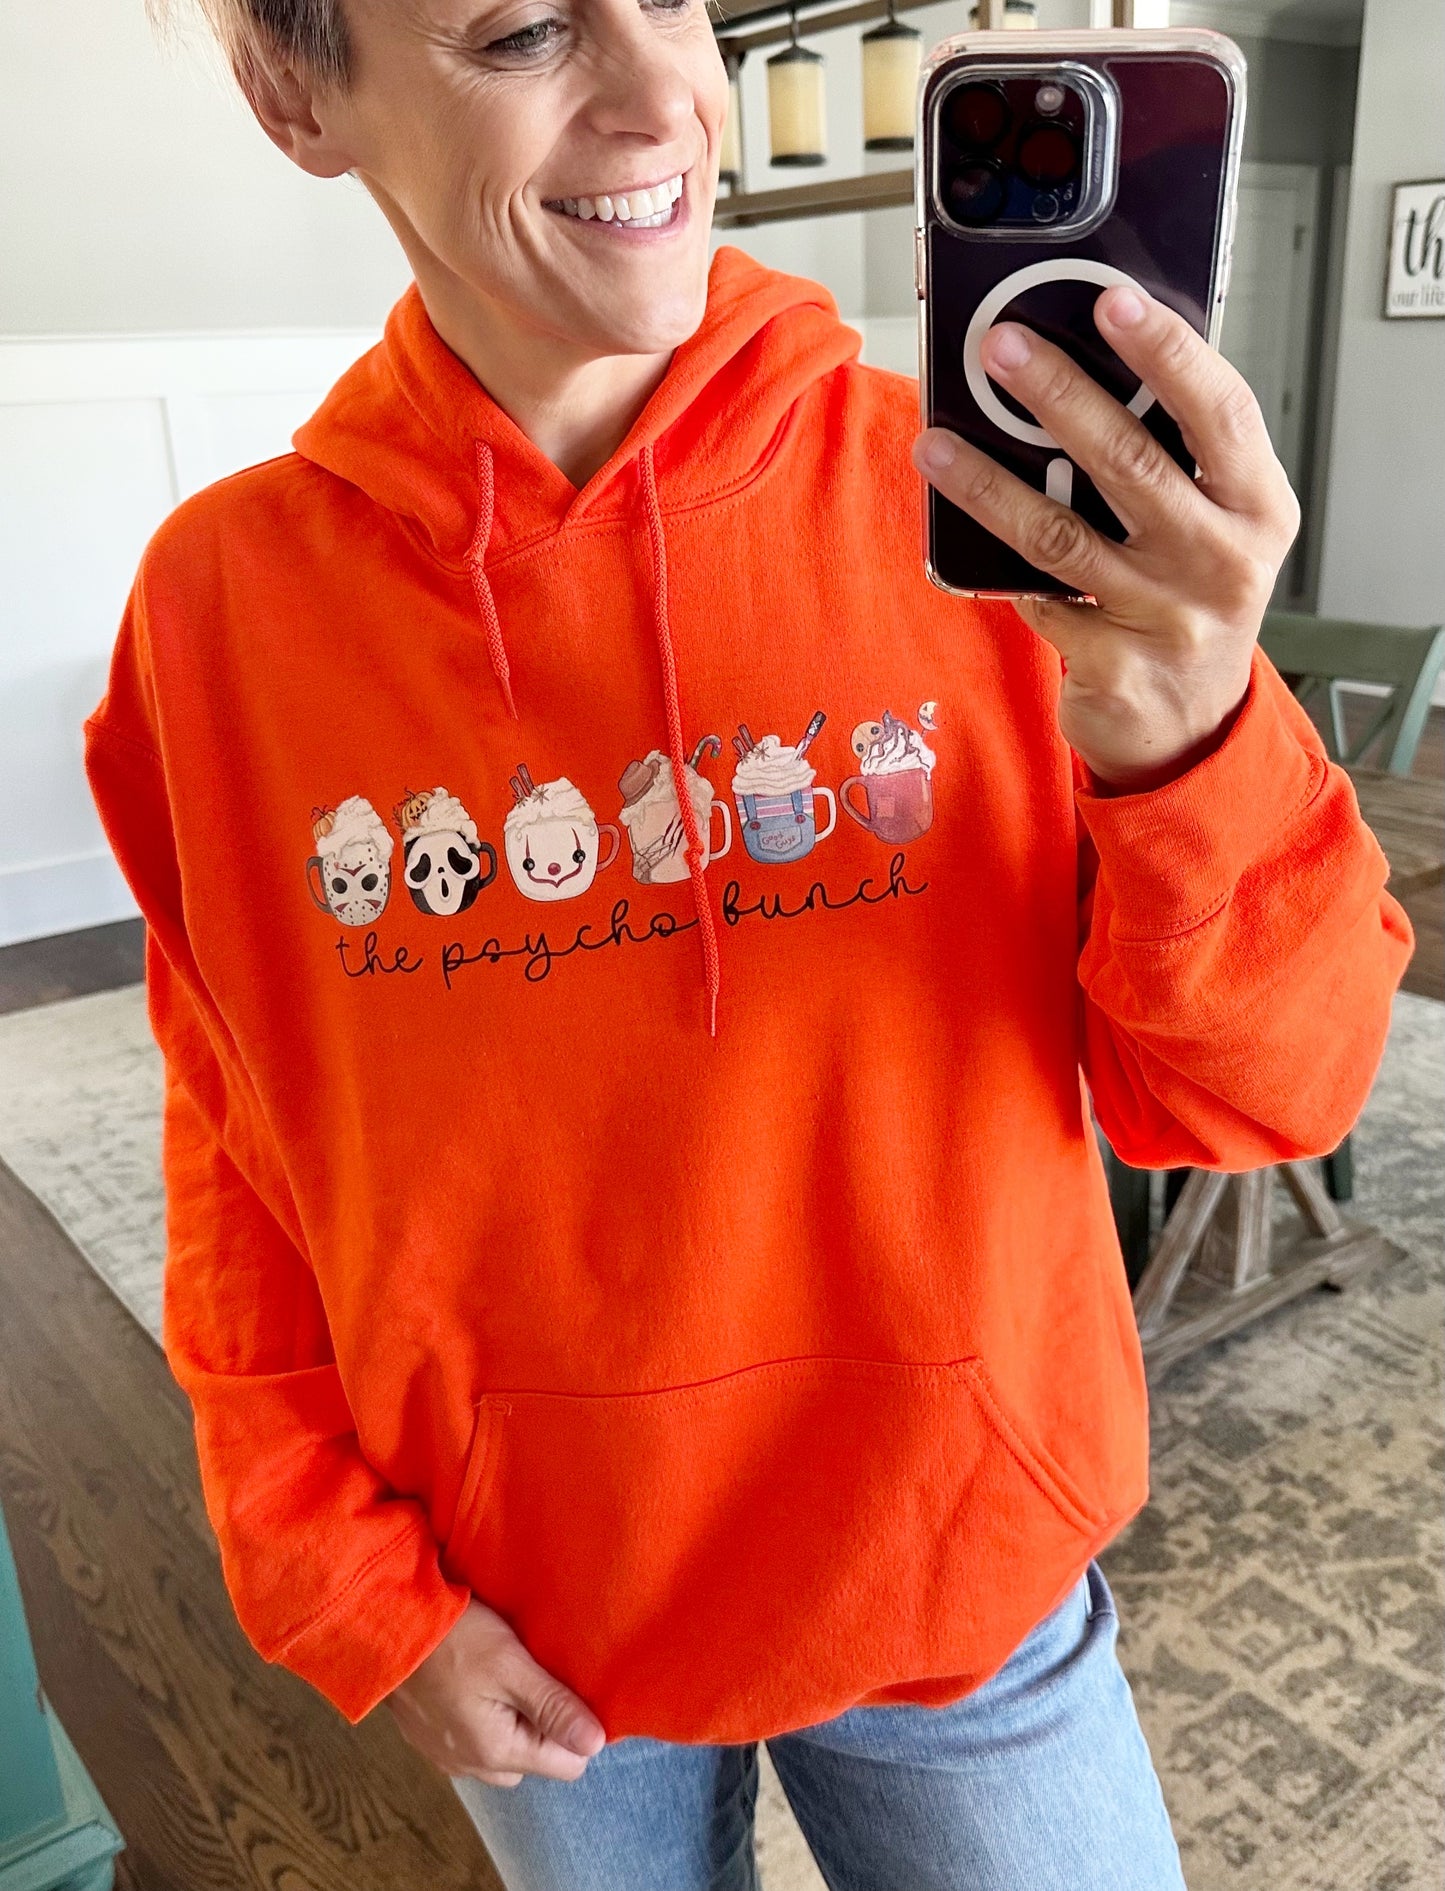 The Psycho Bunch Graphic Hoodie